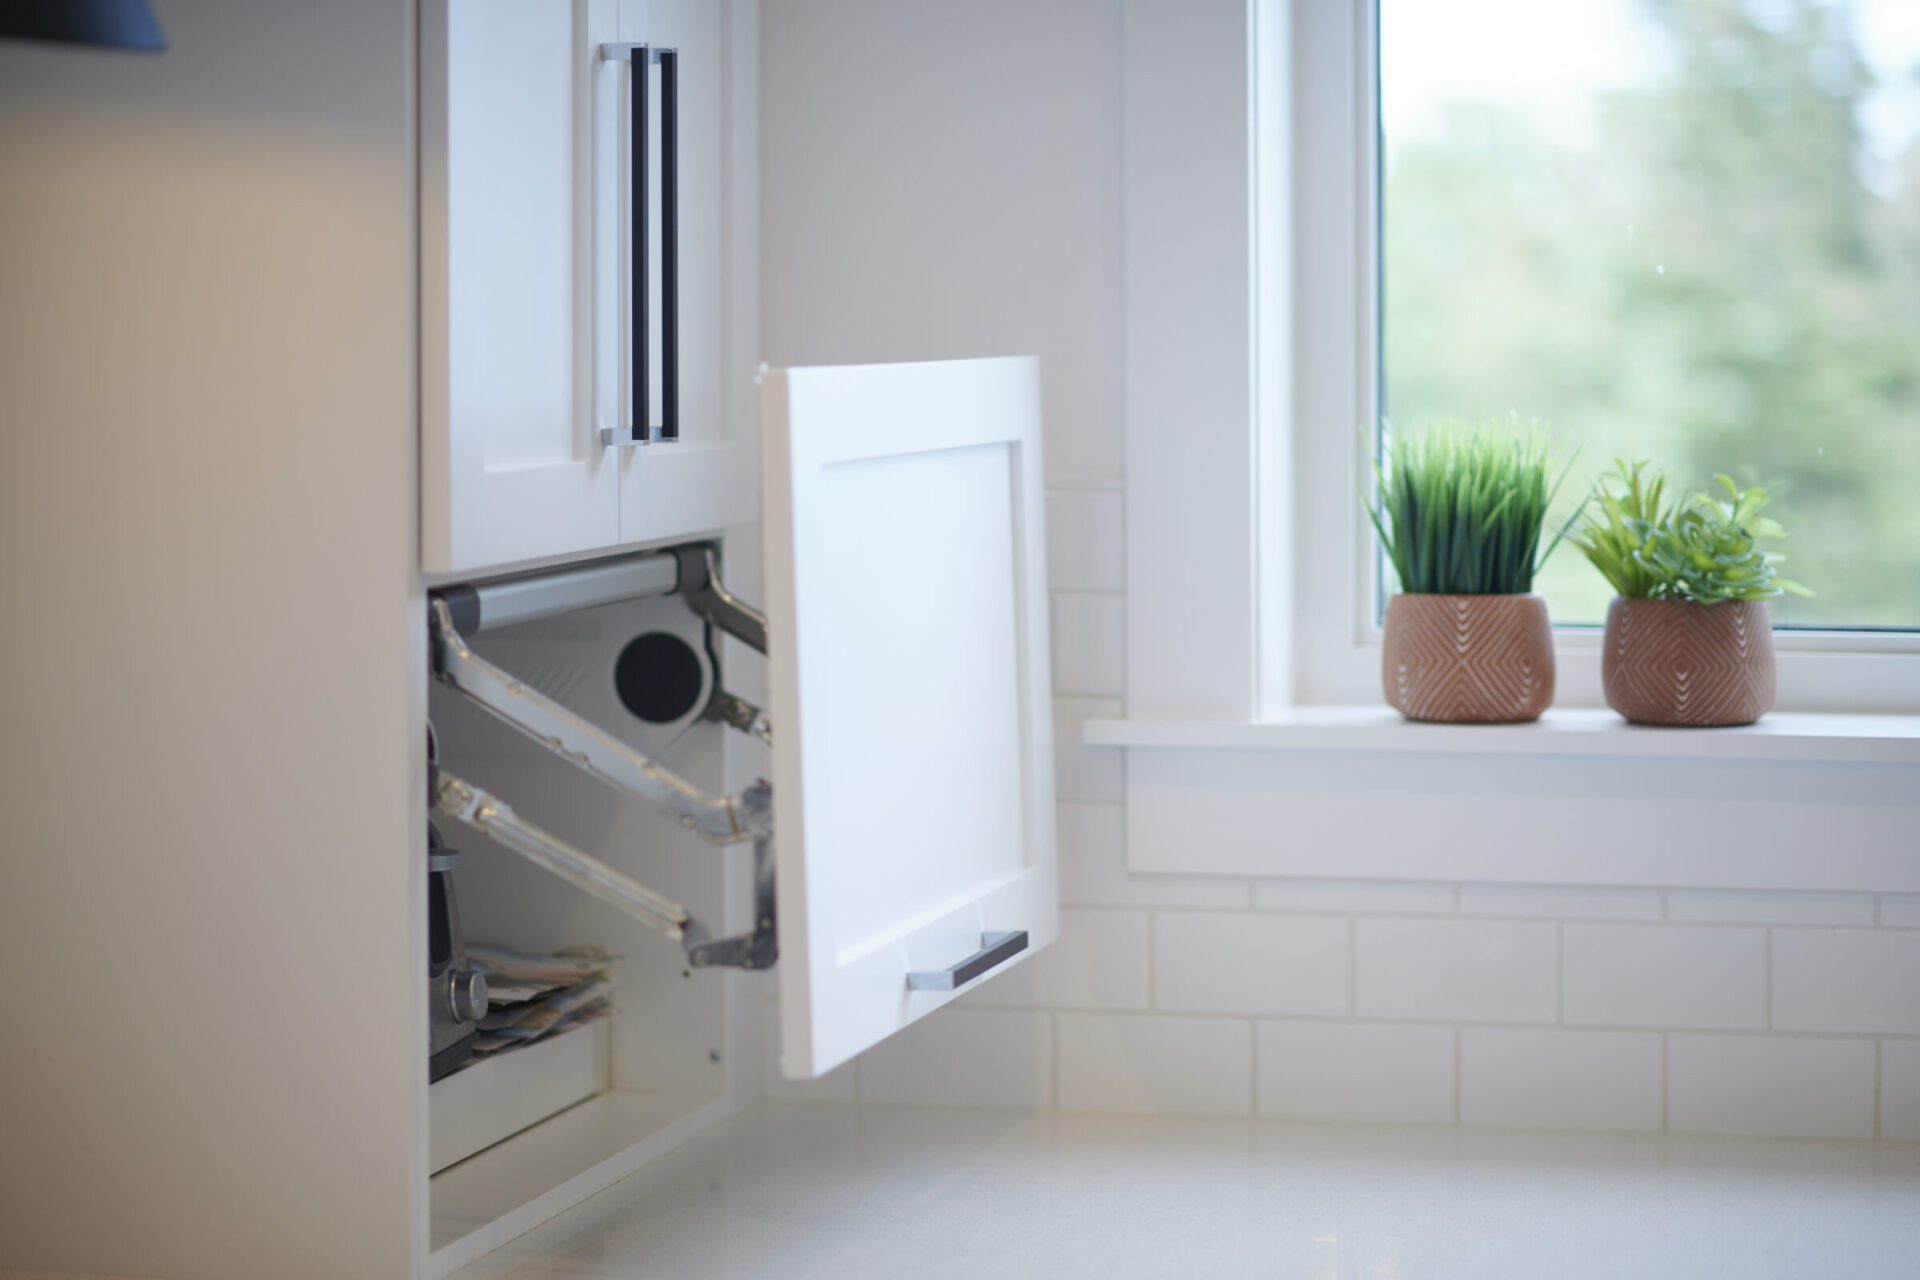 A modern kitchen counter with an open waste bin drawer, next to a window showcasing two potted plants, providing a clean and organized look.